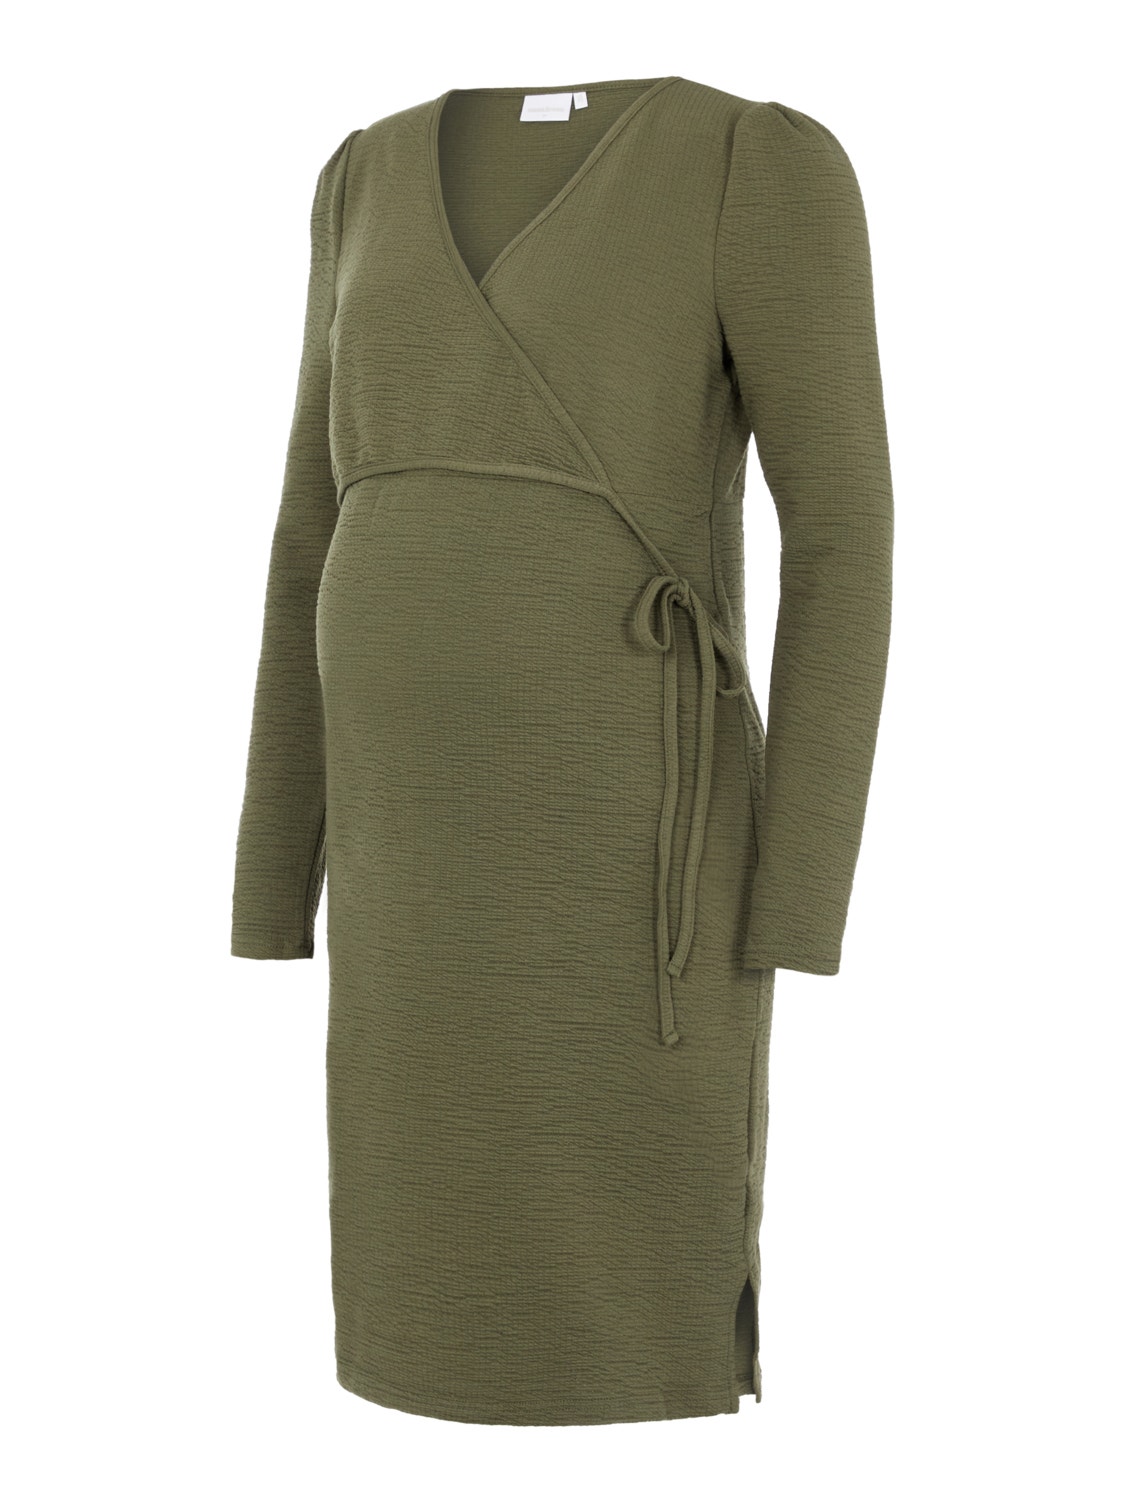 MAMA.LICIOUS Umstands-Kleid -Dusty Olive - 20012670